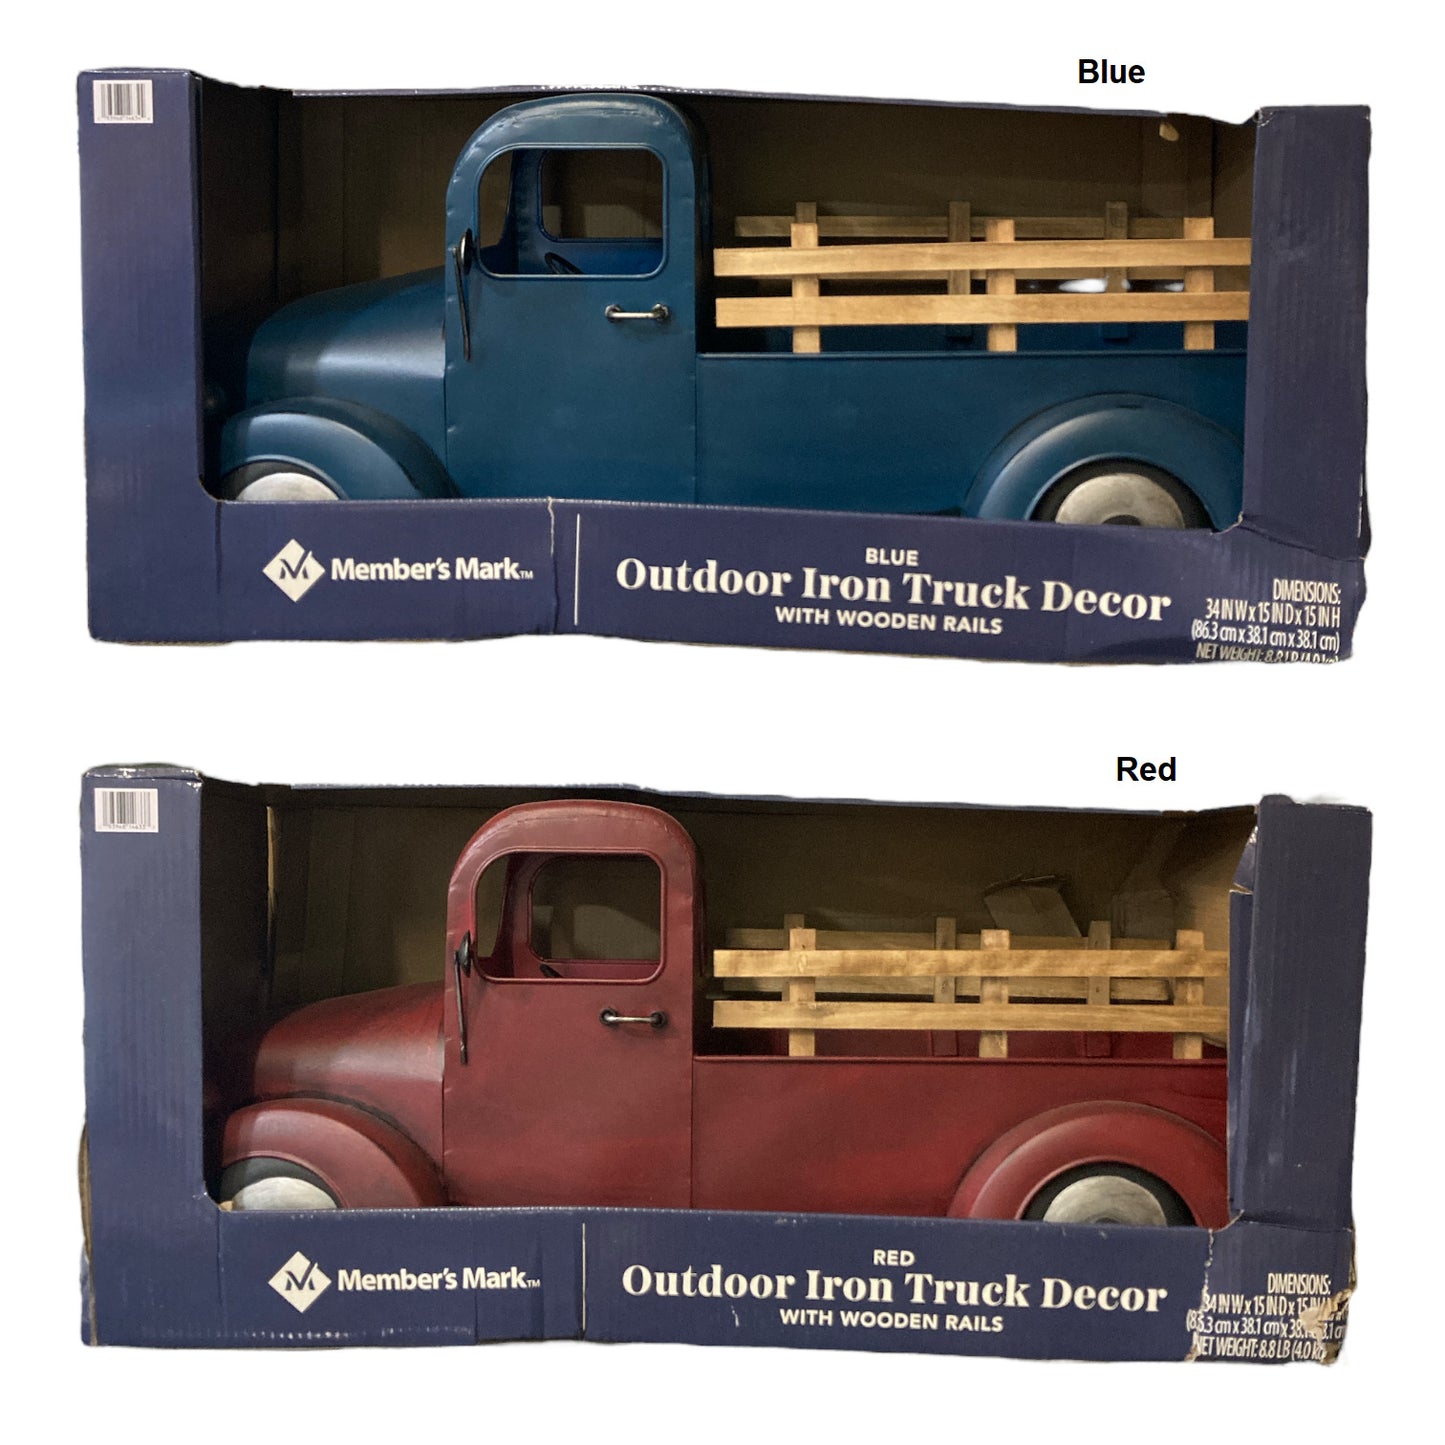 Member's Mark Outdoor Iron Truck Decor With Wooden Rails